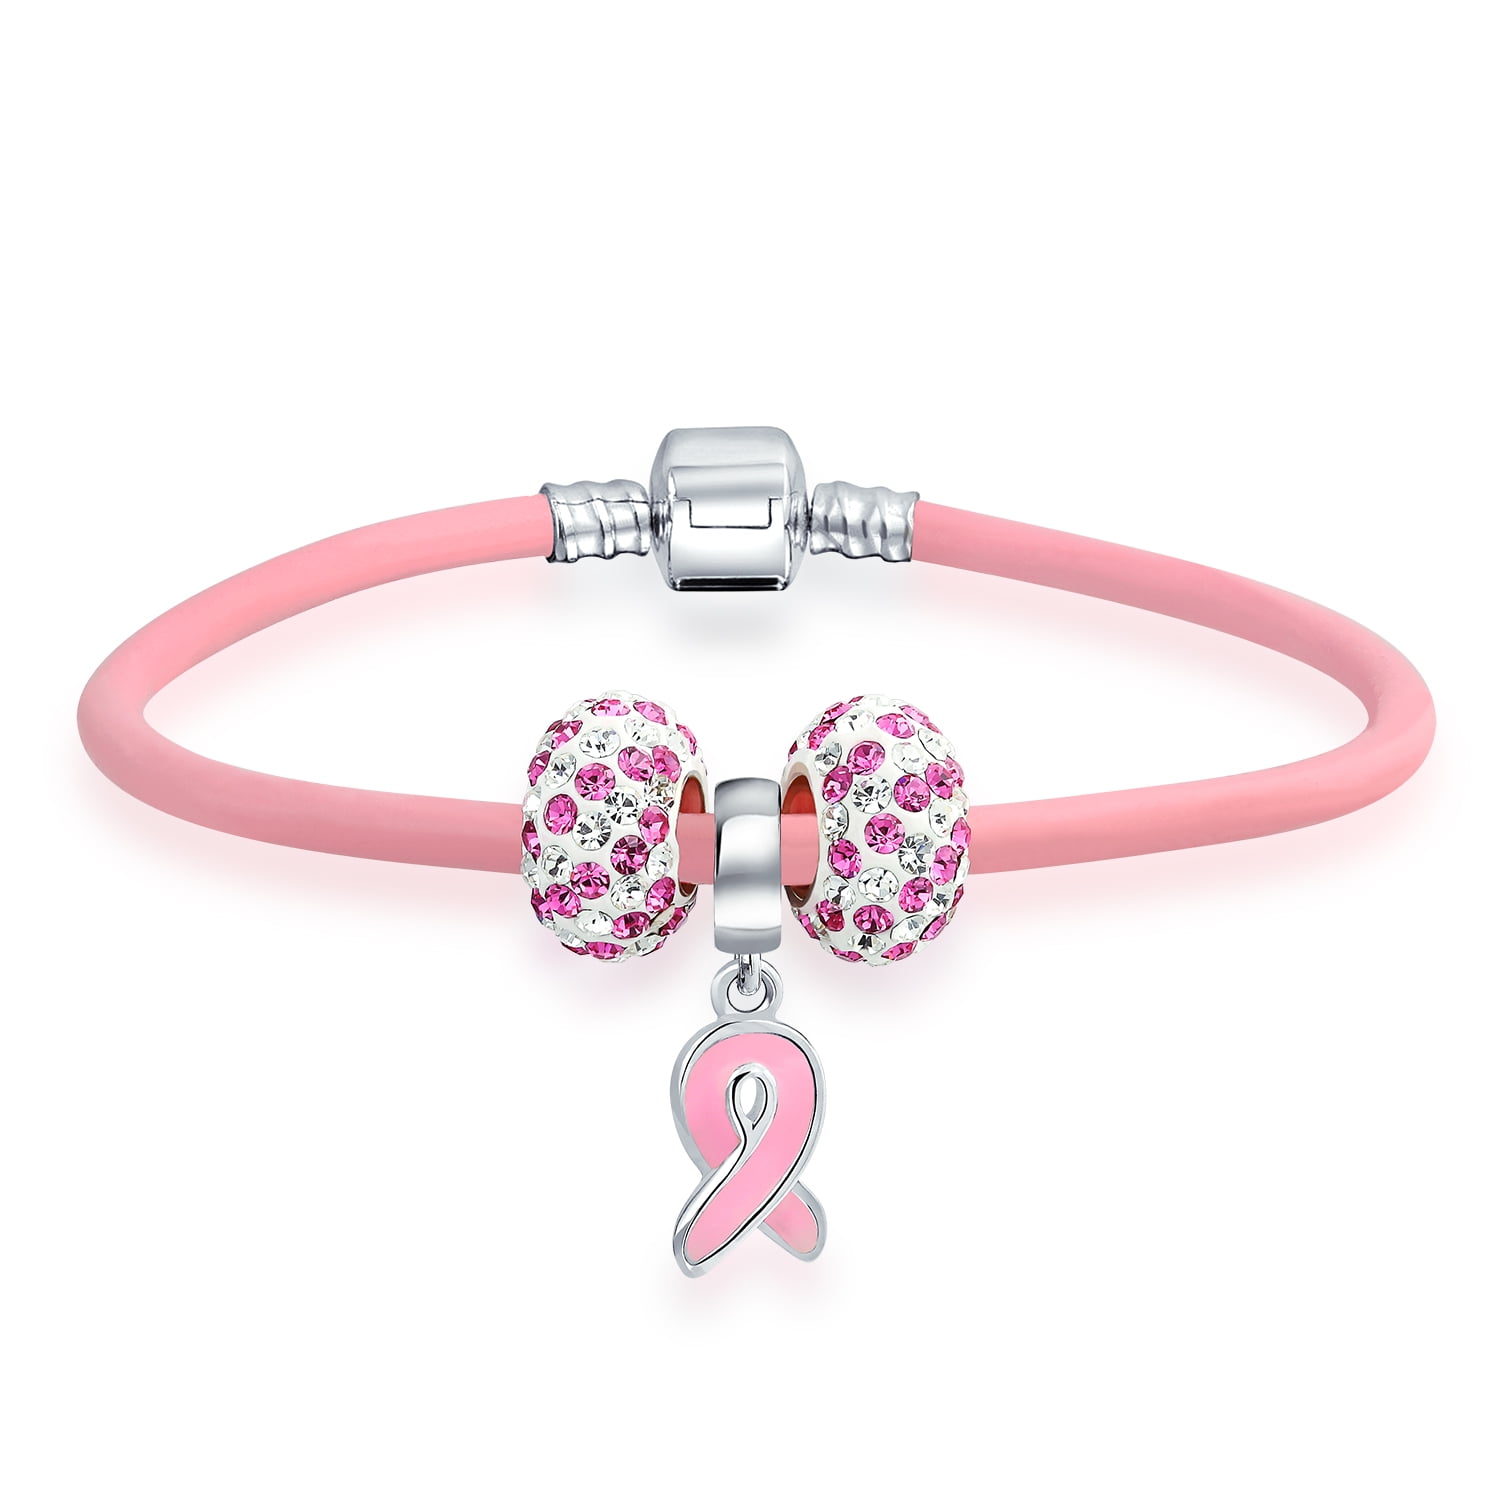 Pink Leather Bracelets with Love Hearts,Dream and Live Your Dream Charm